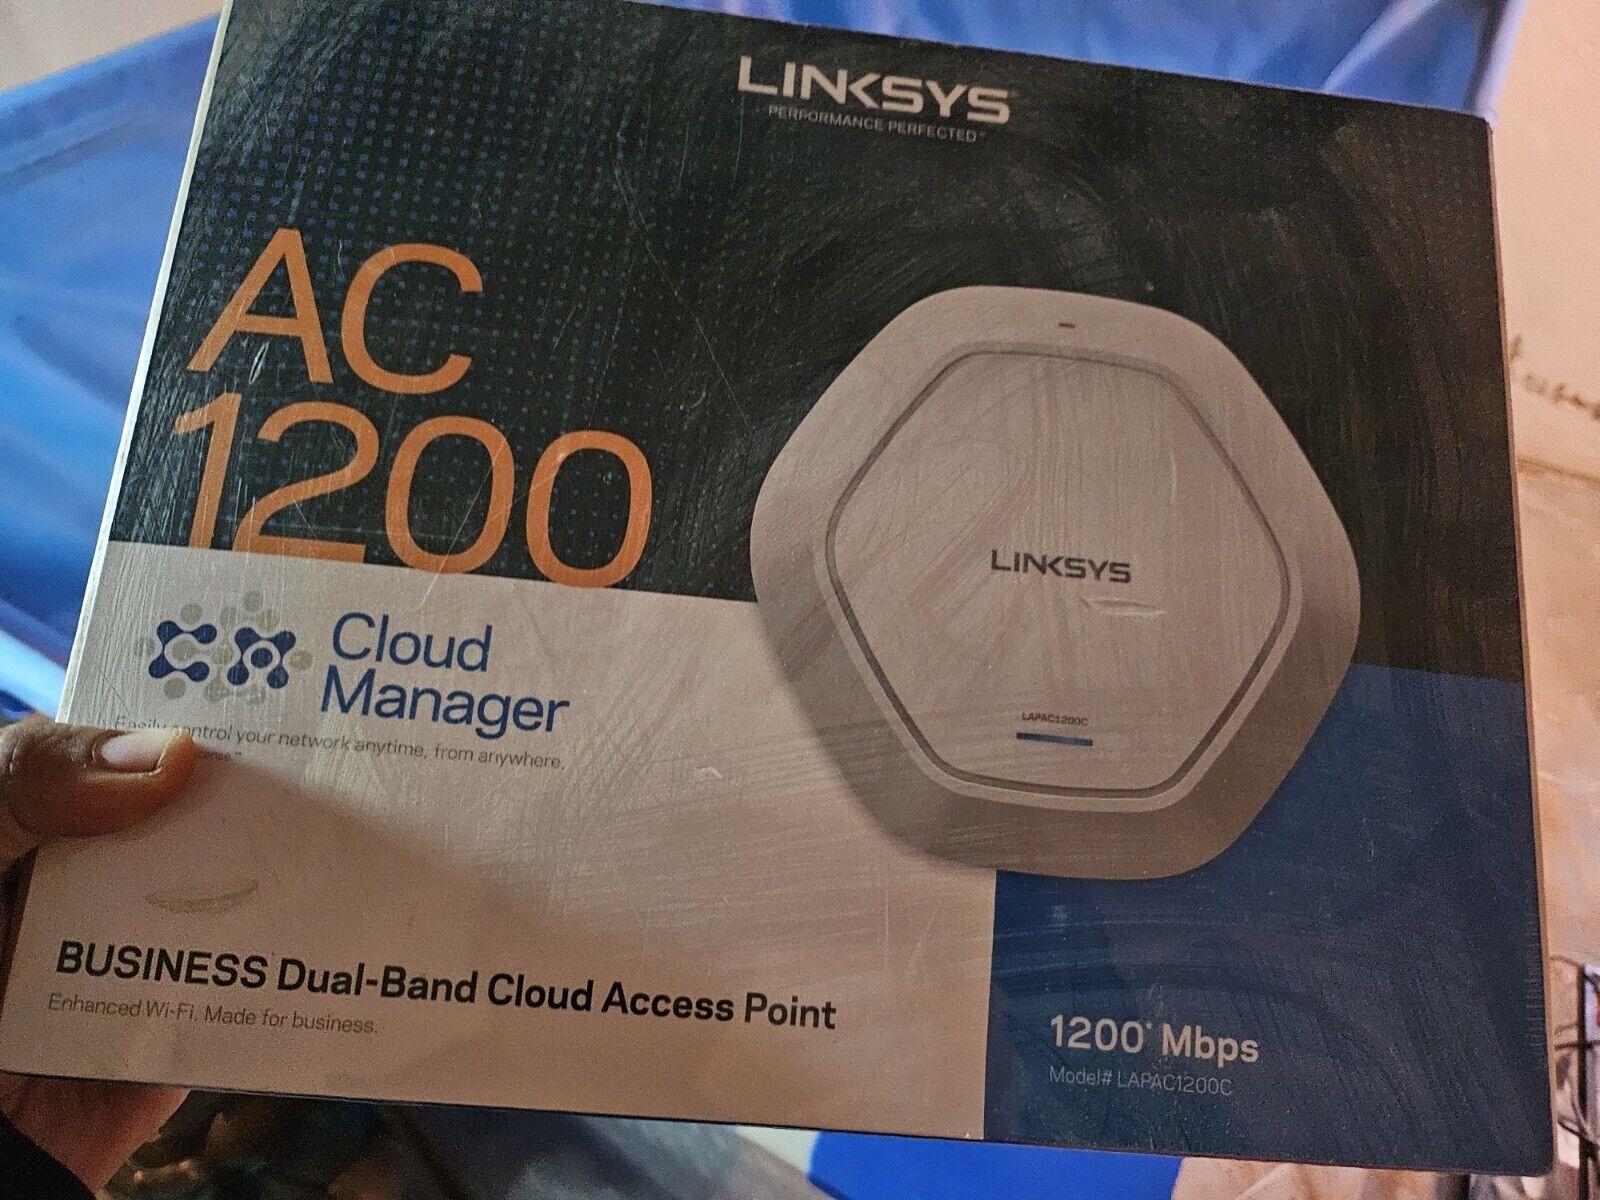 Linksys AC1200 Business Dual Band Cloud Access Point - Brand New in sealed box